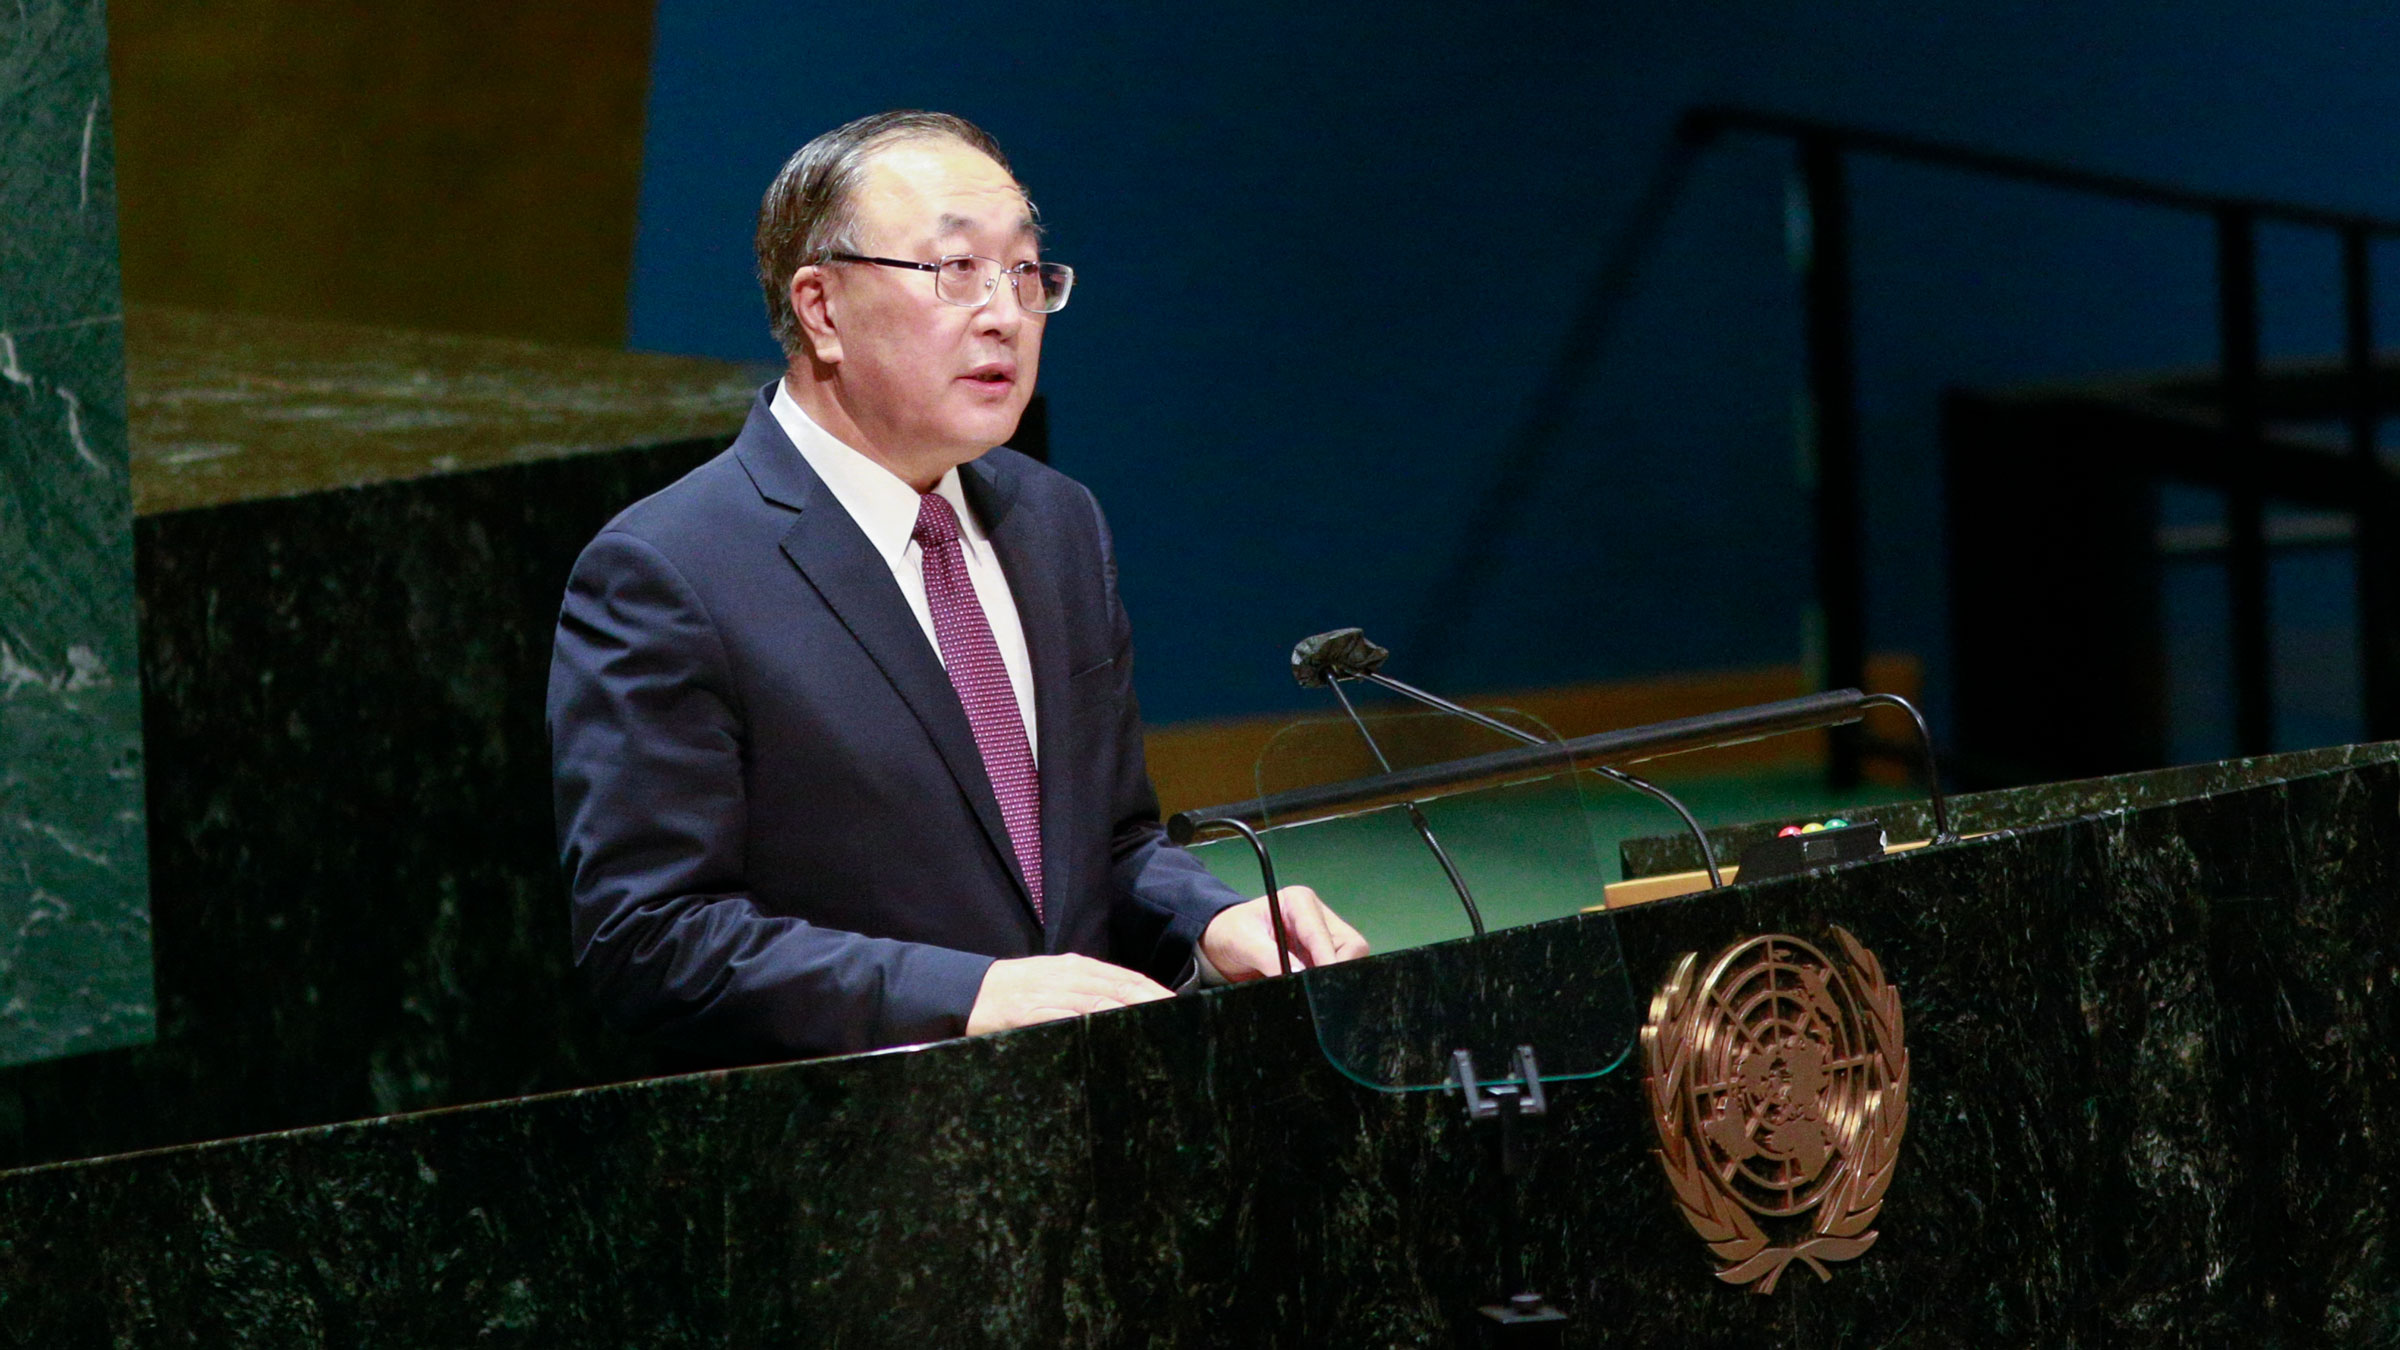 Zhang Jun, China's representative to the United Nations, speaks at the emergency special session of the UN General Assembly on Monday.